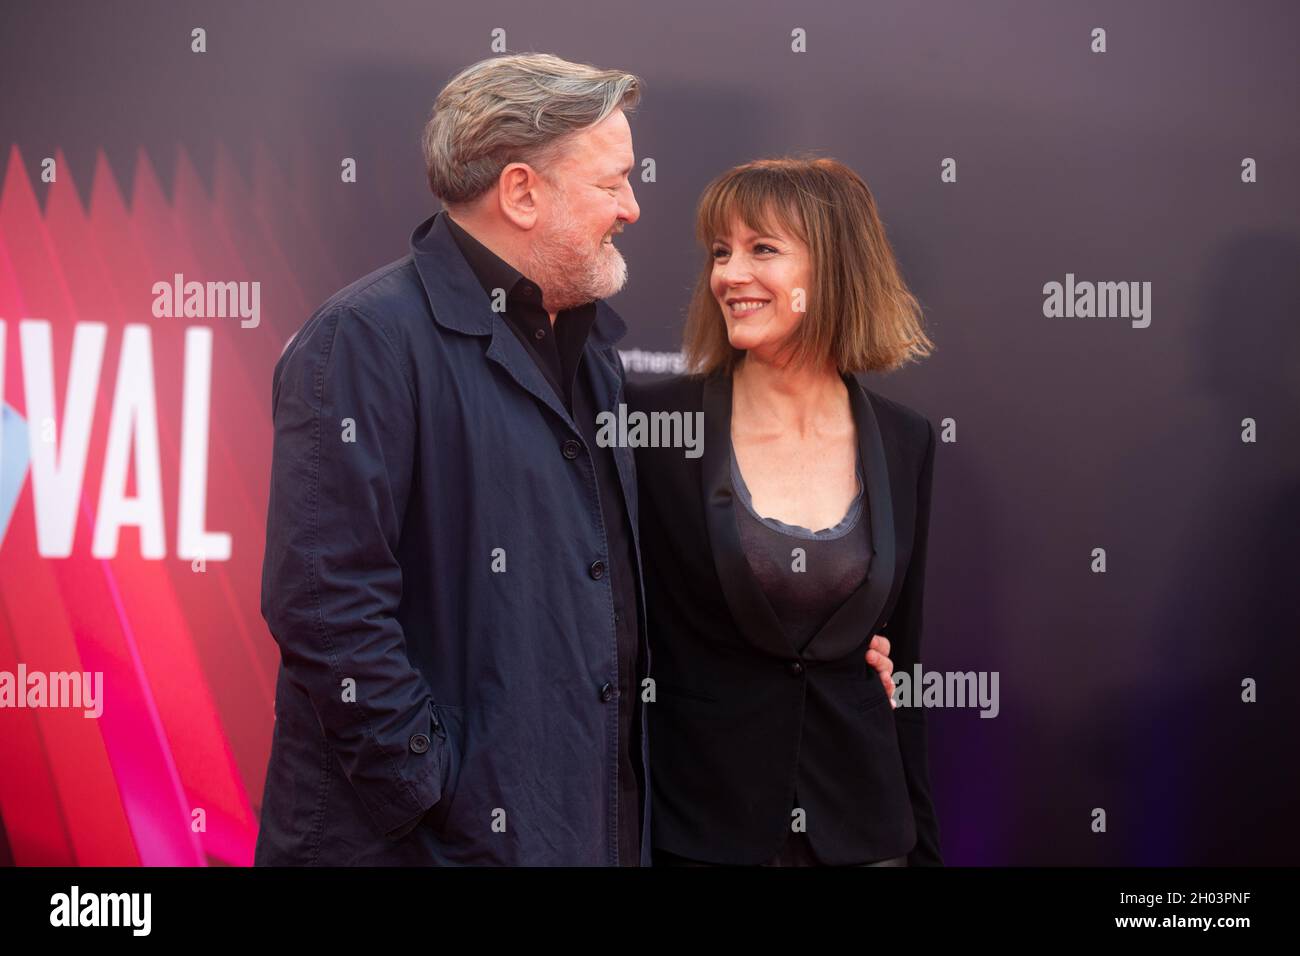 London, UK - October 9th, 2021: Guy Garvey and Rachael Stirling attend 'The Last Night In Soho' UK Premiere during the 65th BFI London Film Festival Stock Photo